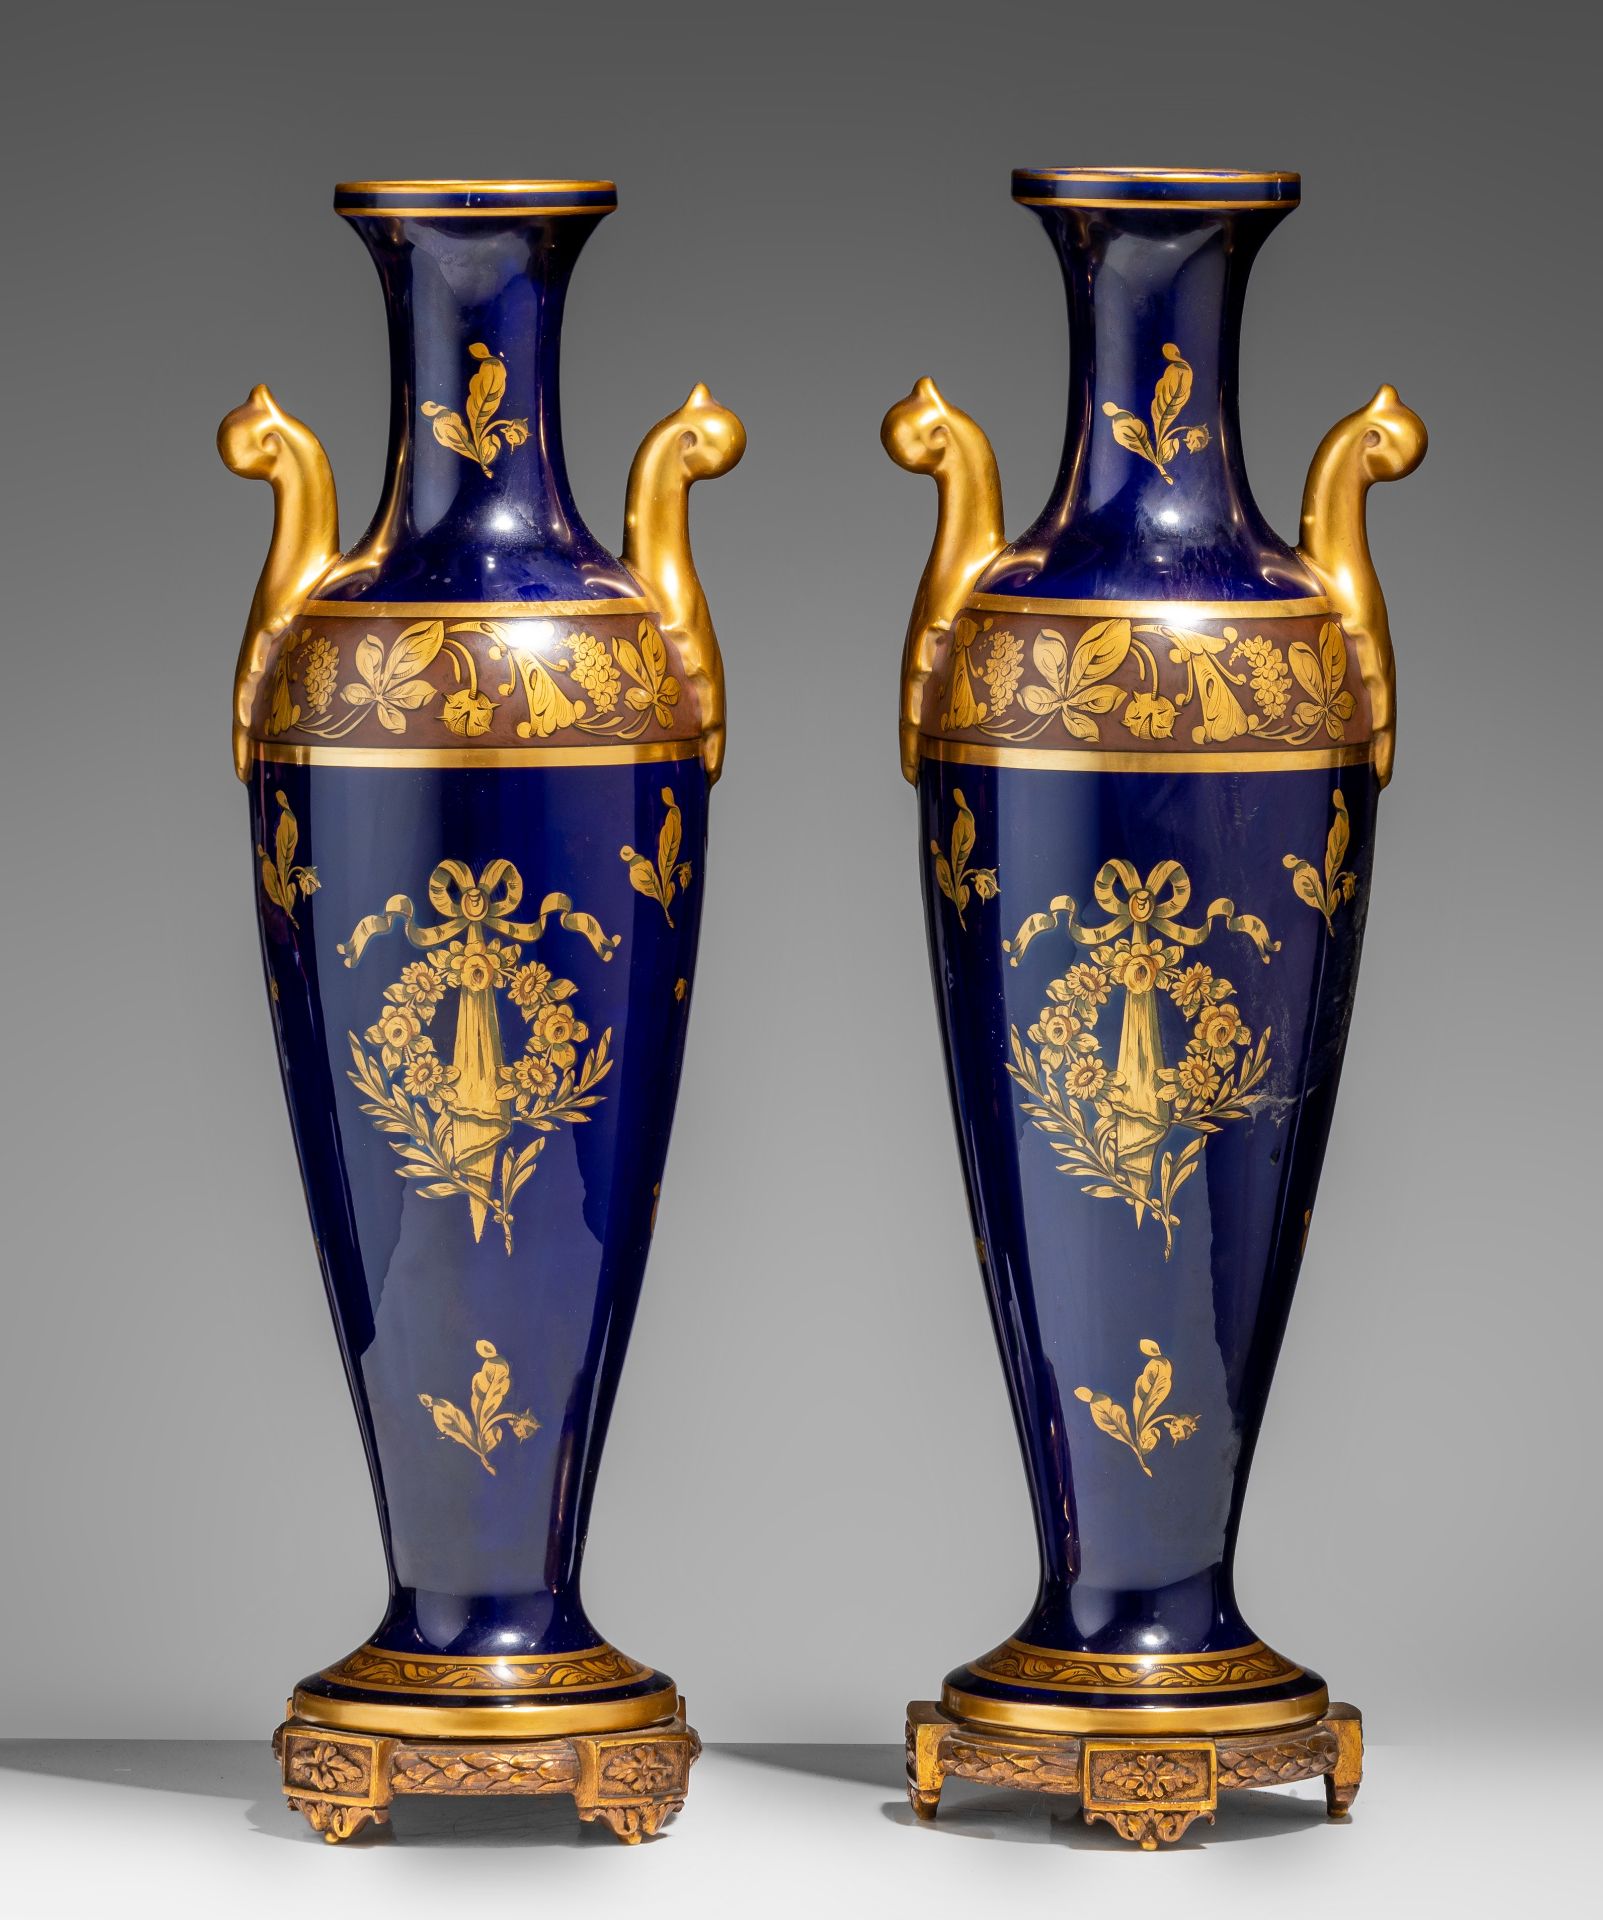 A pair of blue Royal ground and gilt decorated oblong Sevres-type vases, H 49,5 cm - Image 2 of 7